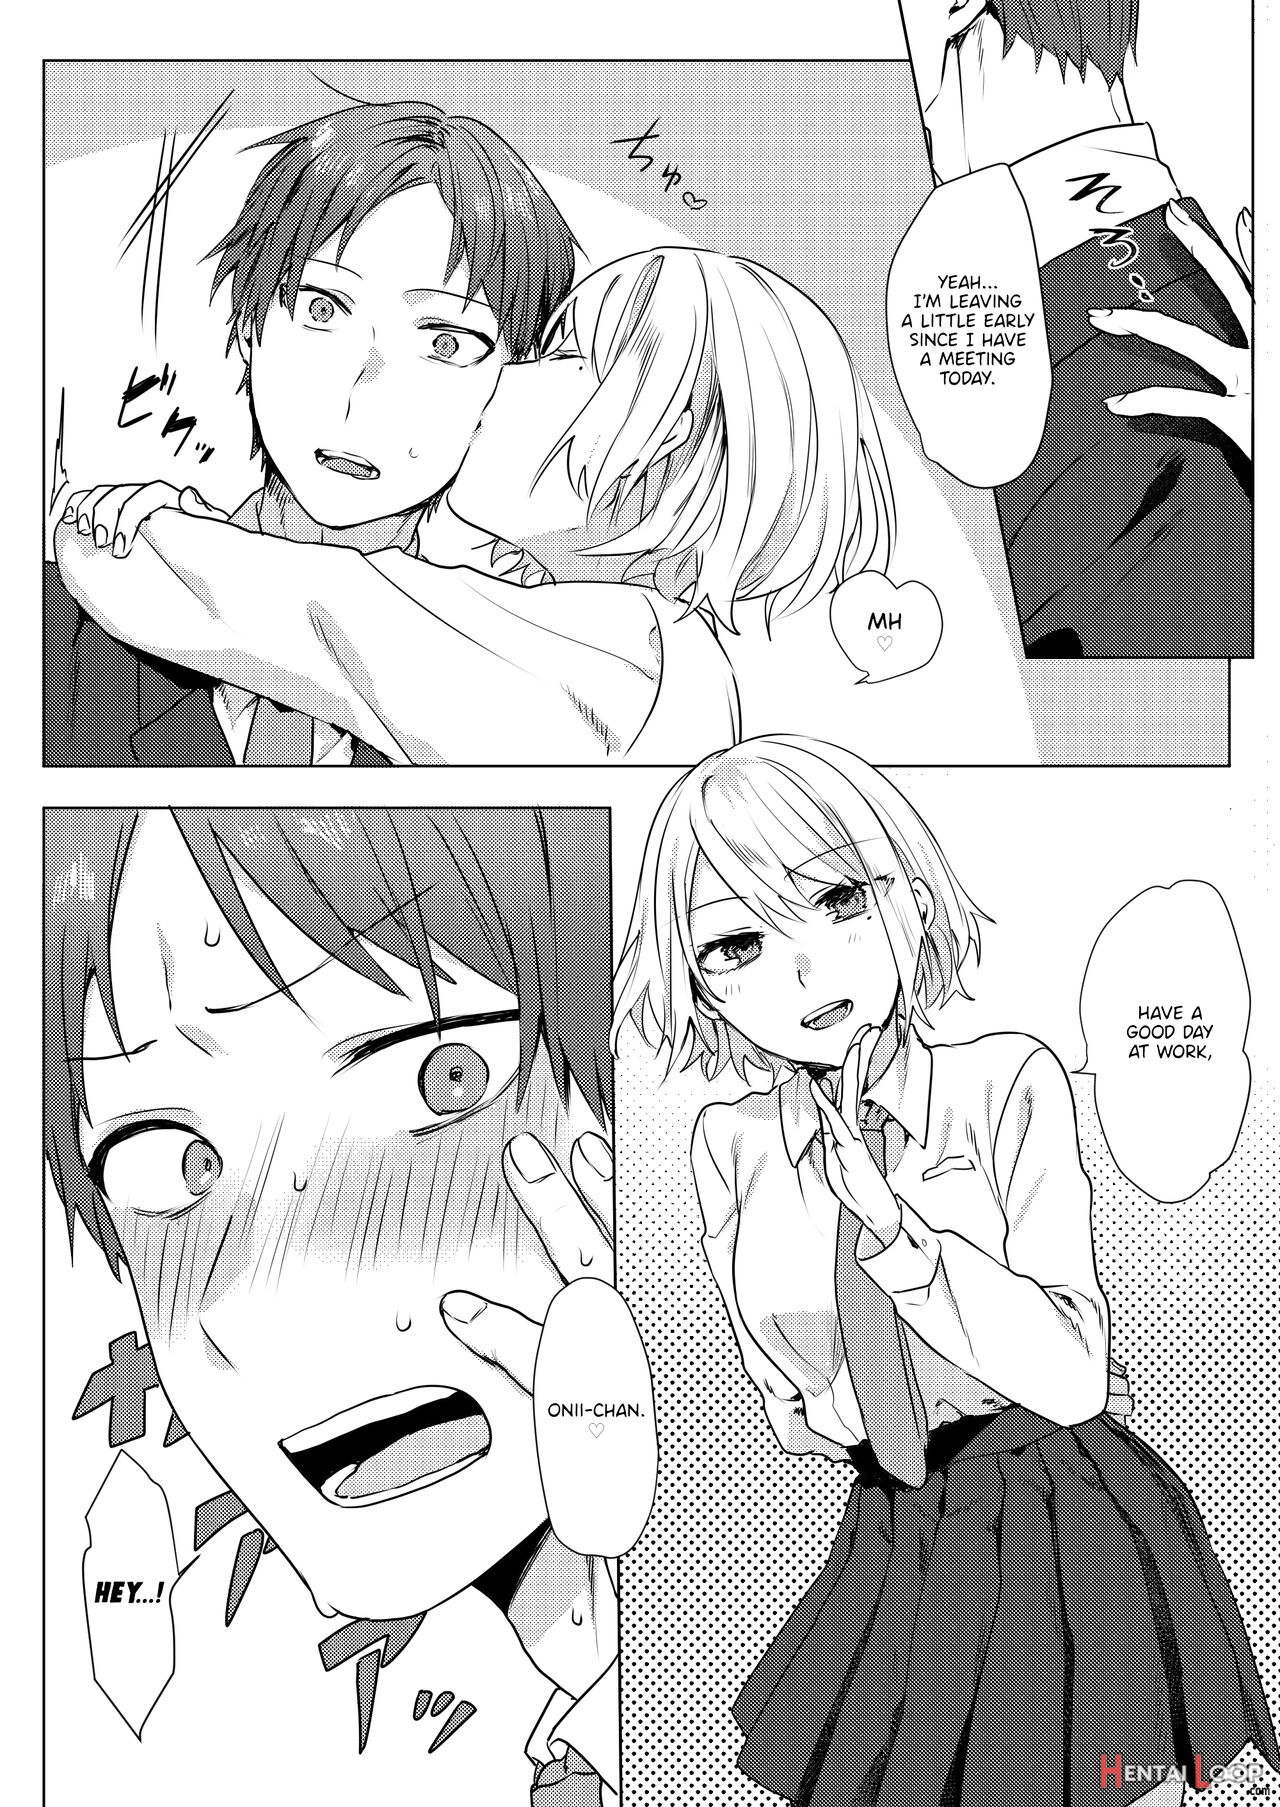 A Plan To Seduce My Onii-chan page 5